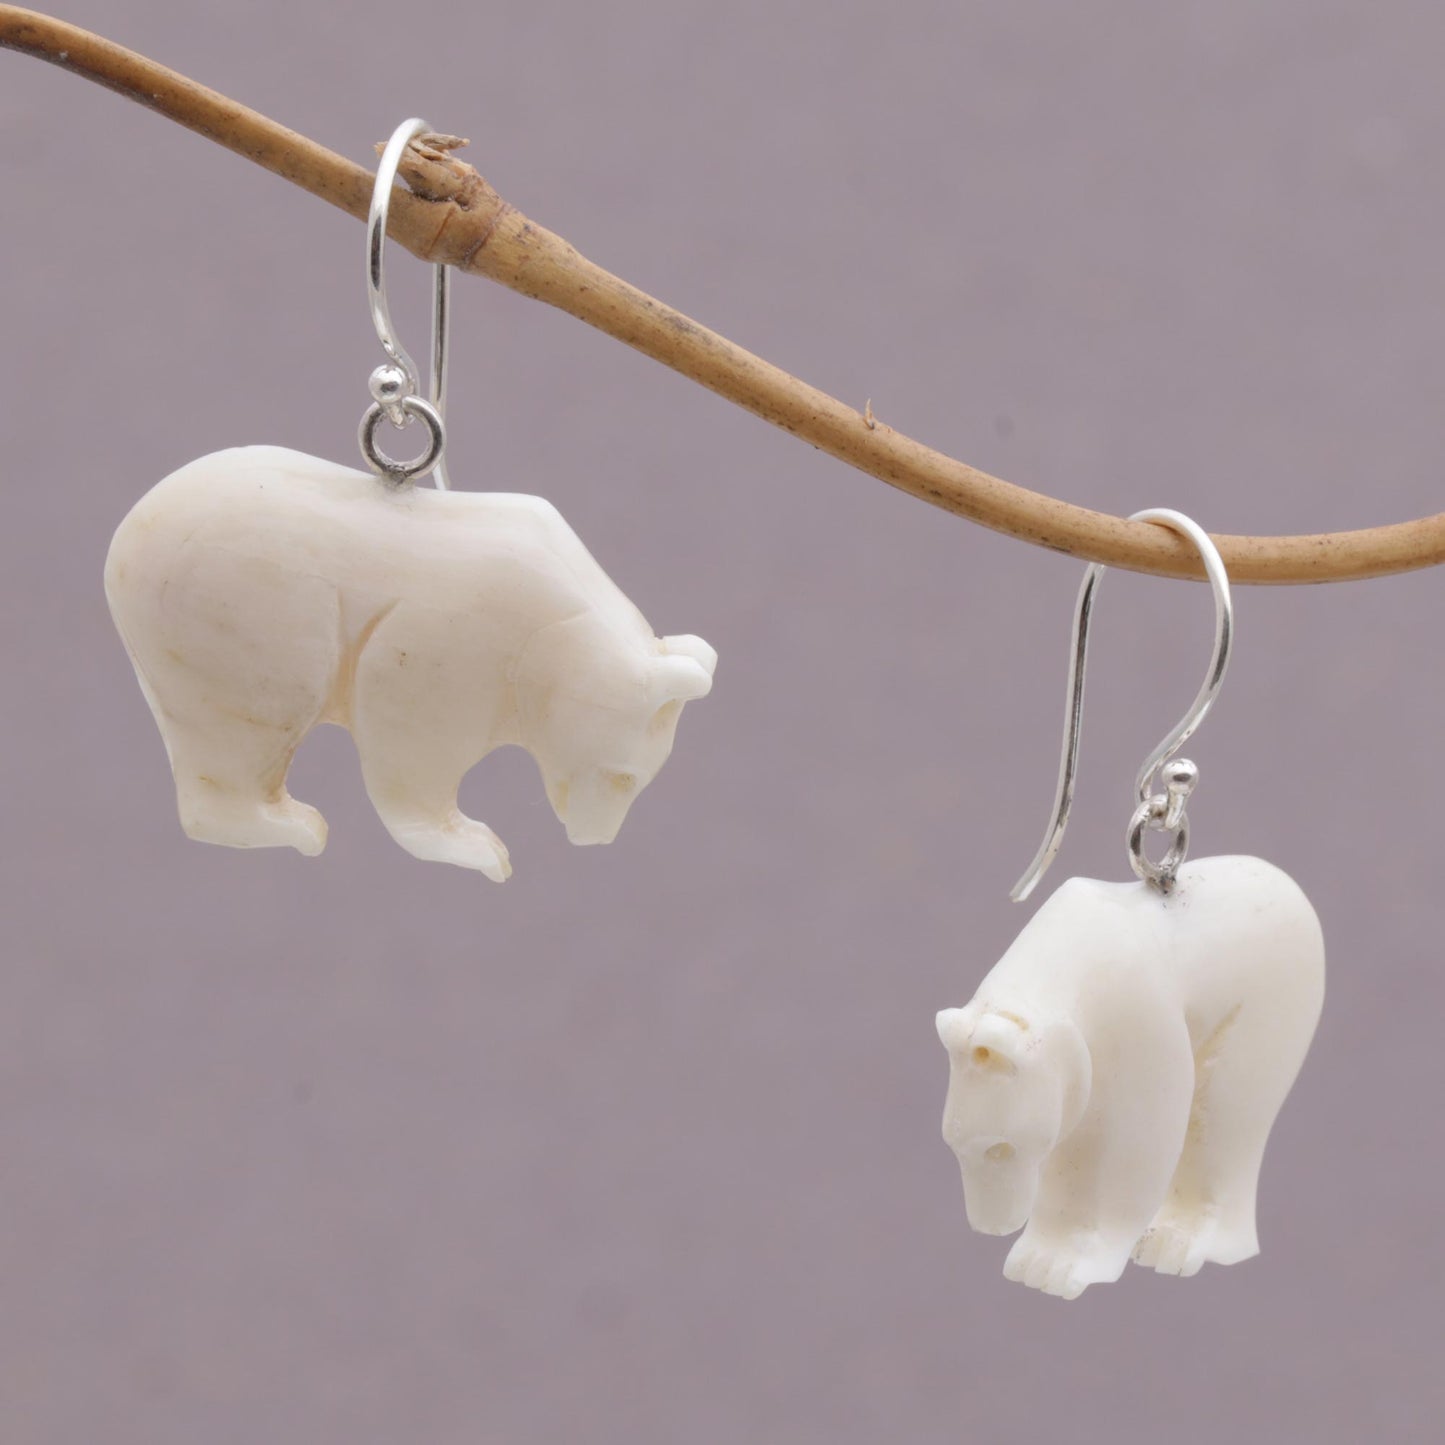 Grizzly Brothers Handcrafted Bone Grizzly Bear Dangle Earrings from Bali